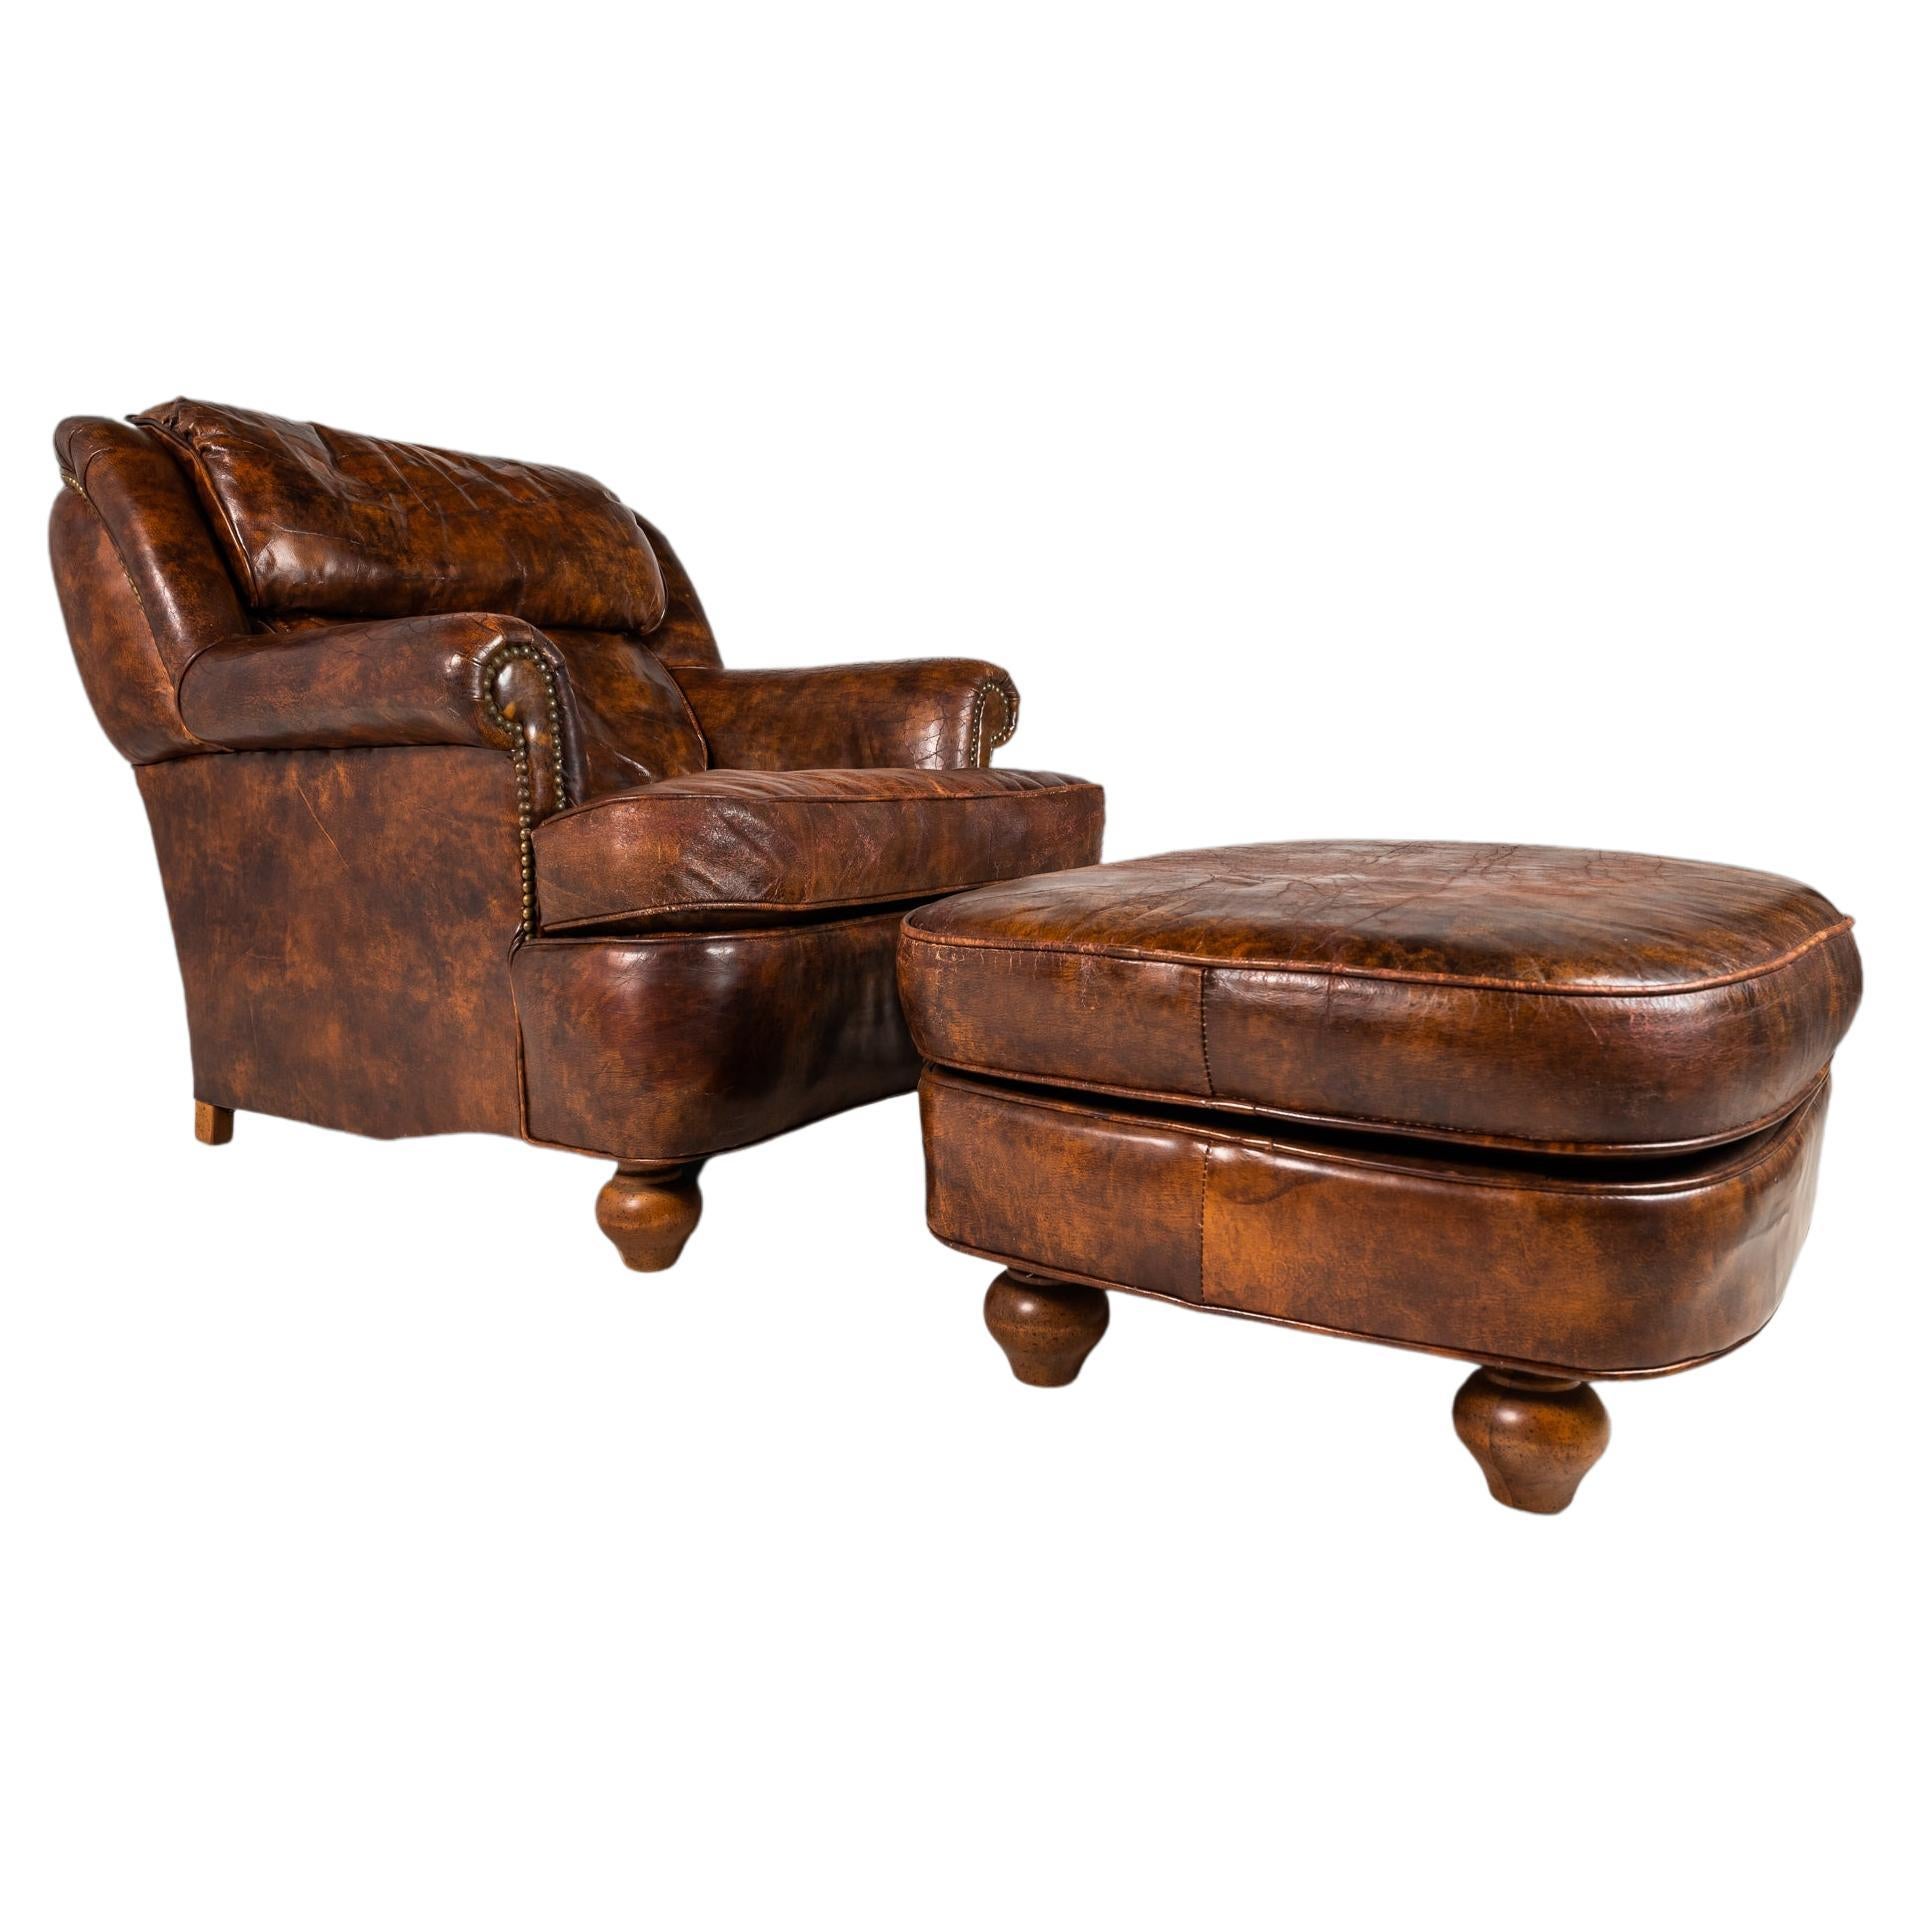 Patinaed French Club Chair Cigar Chair & Ottoman in Distressed Leather c. 1940s